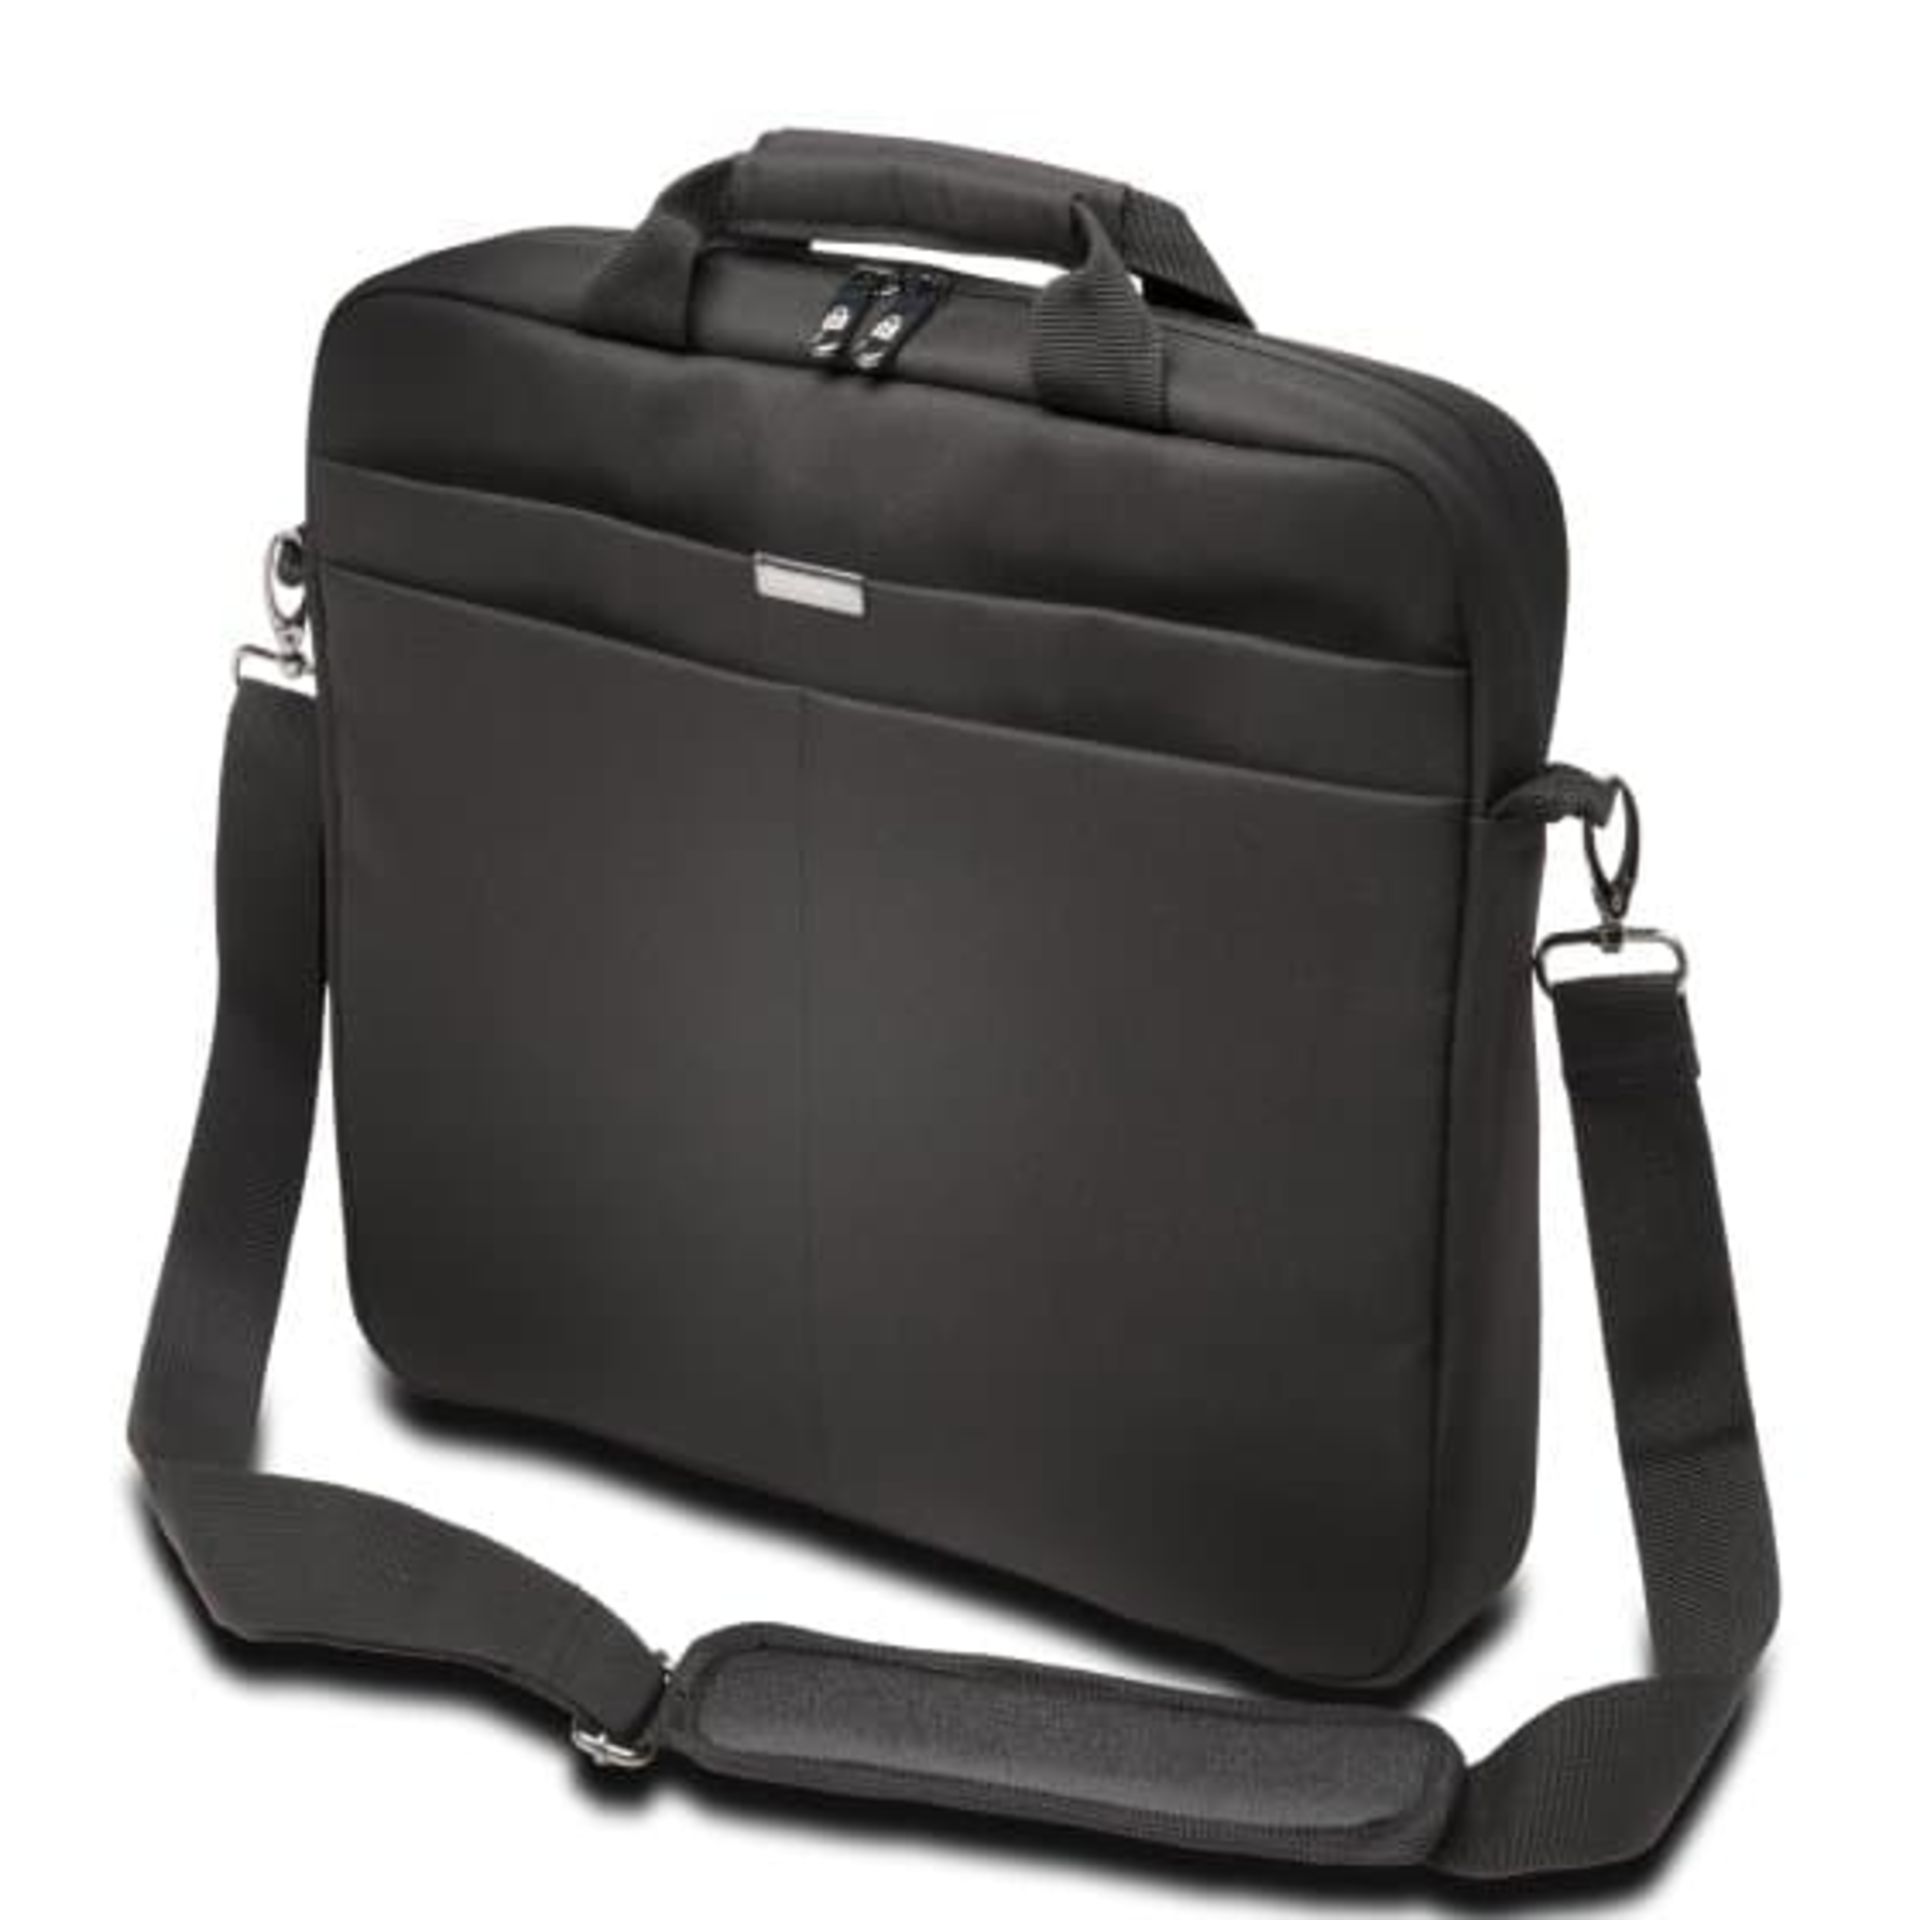 V *TRADE QTY* Brand New Kensington LS240 Laptop Carrying Case RRP £21.32 ISP £18.99 *ITEM IS RED*